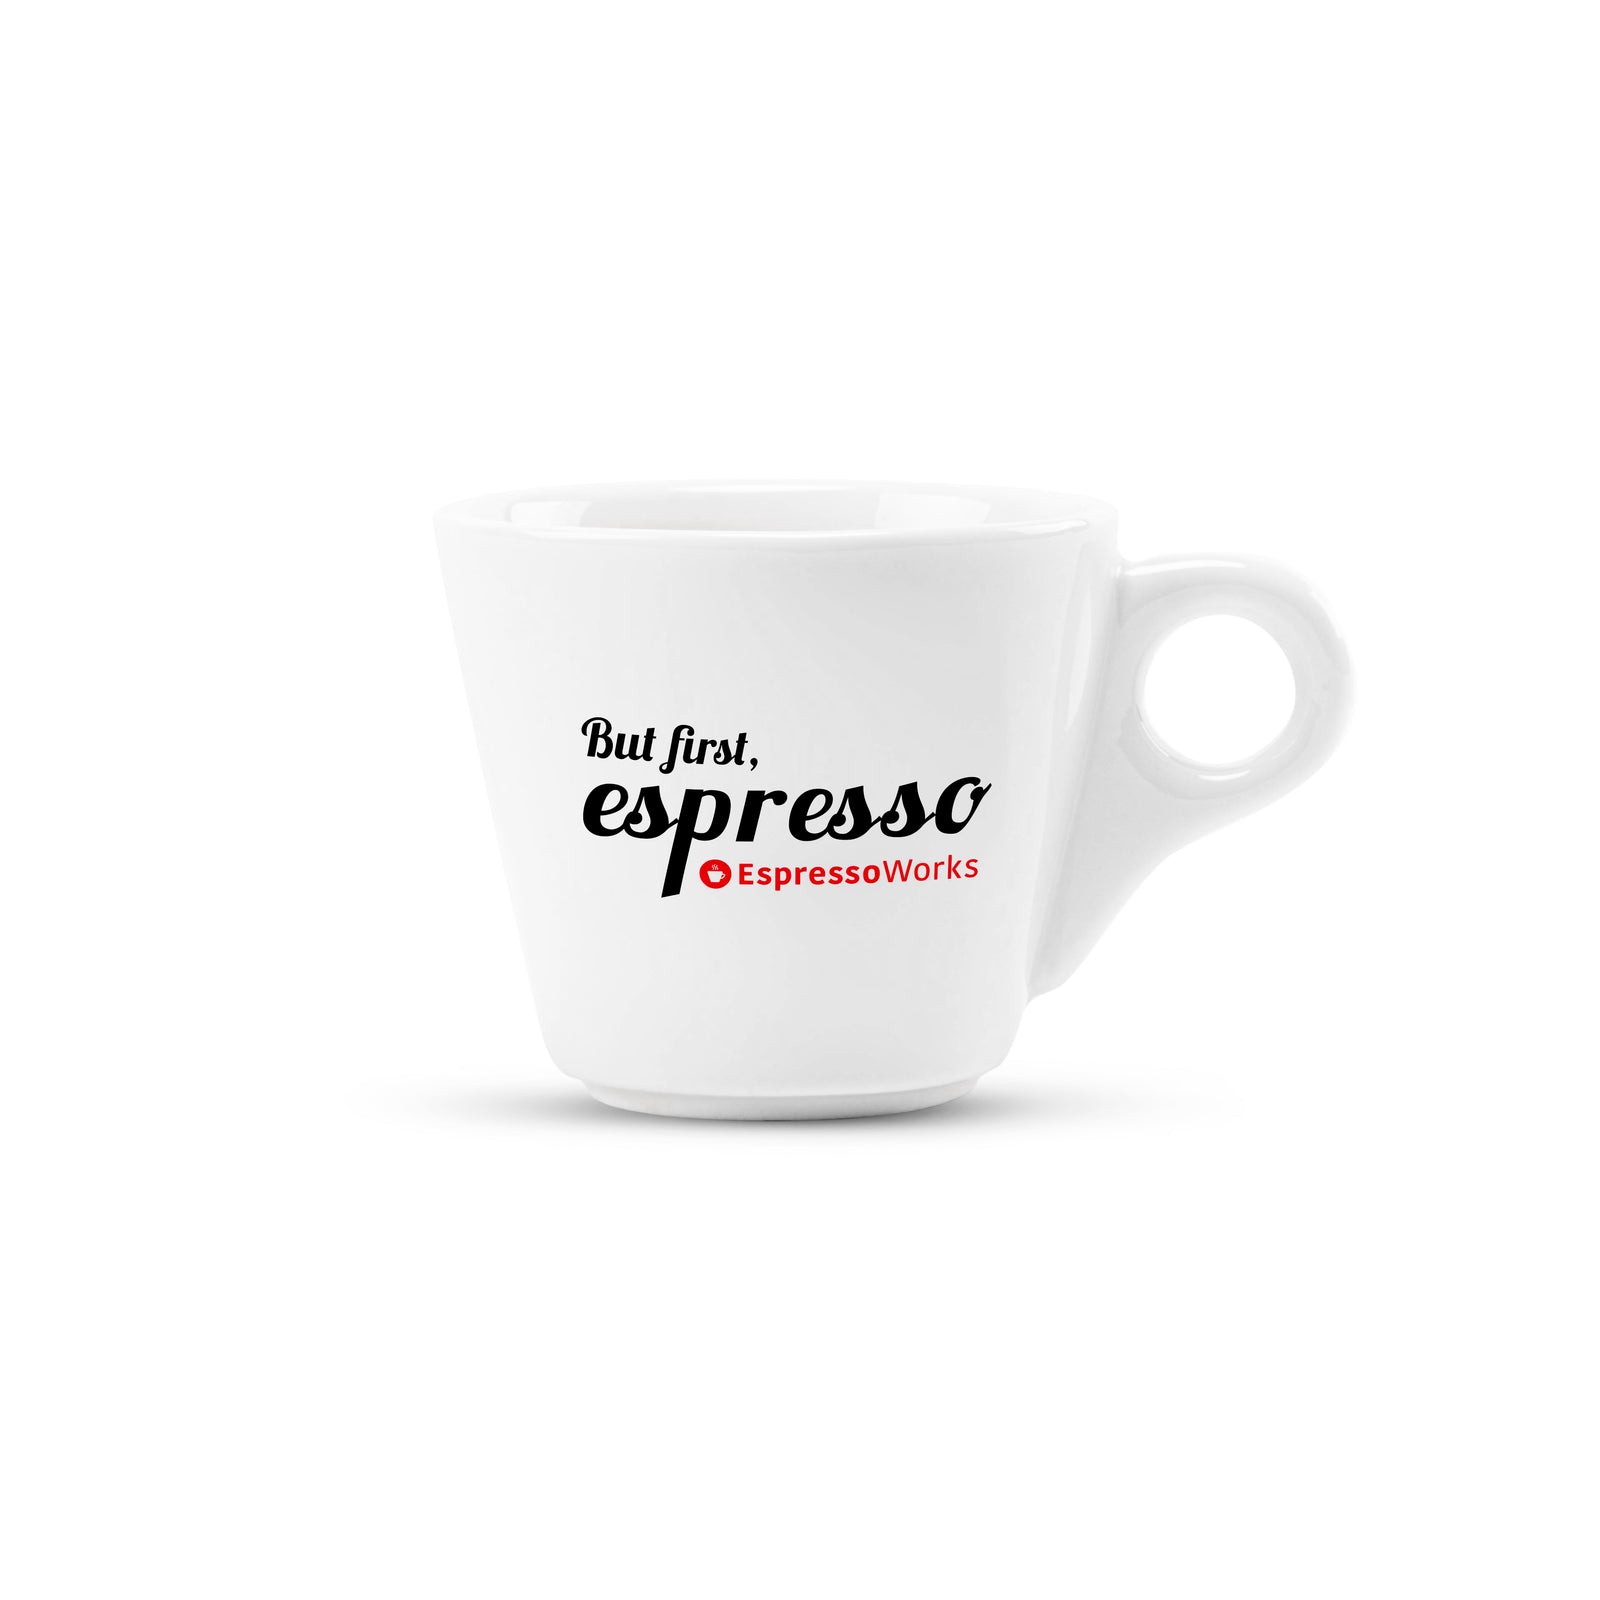 I love photographing my work and these new espresso cups are so